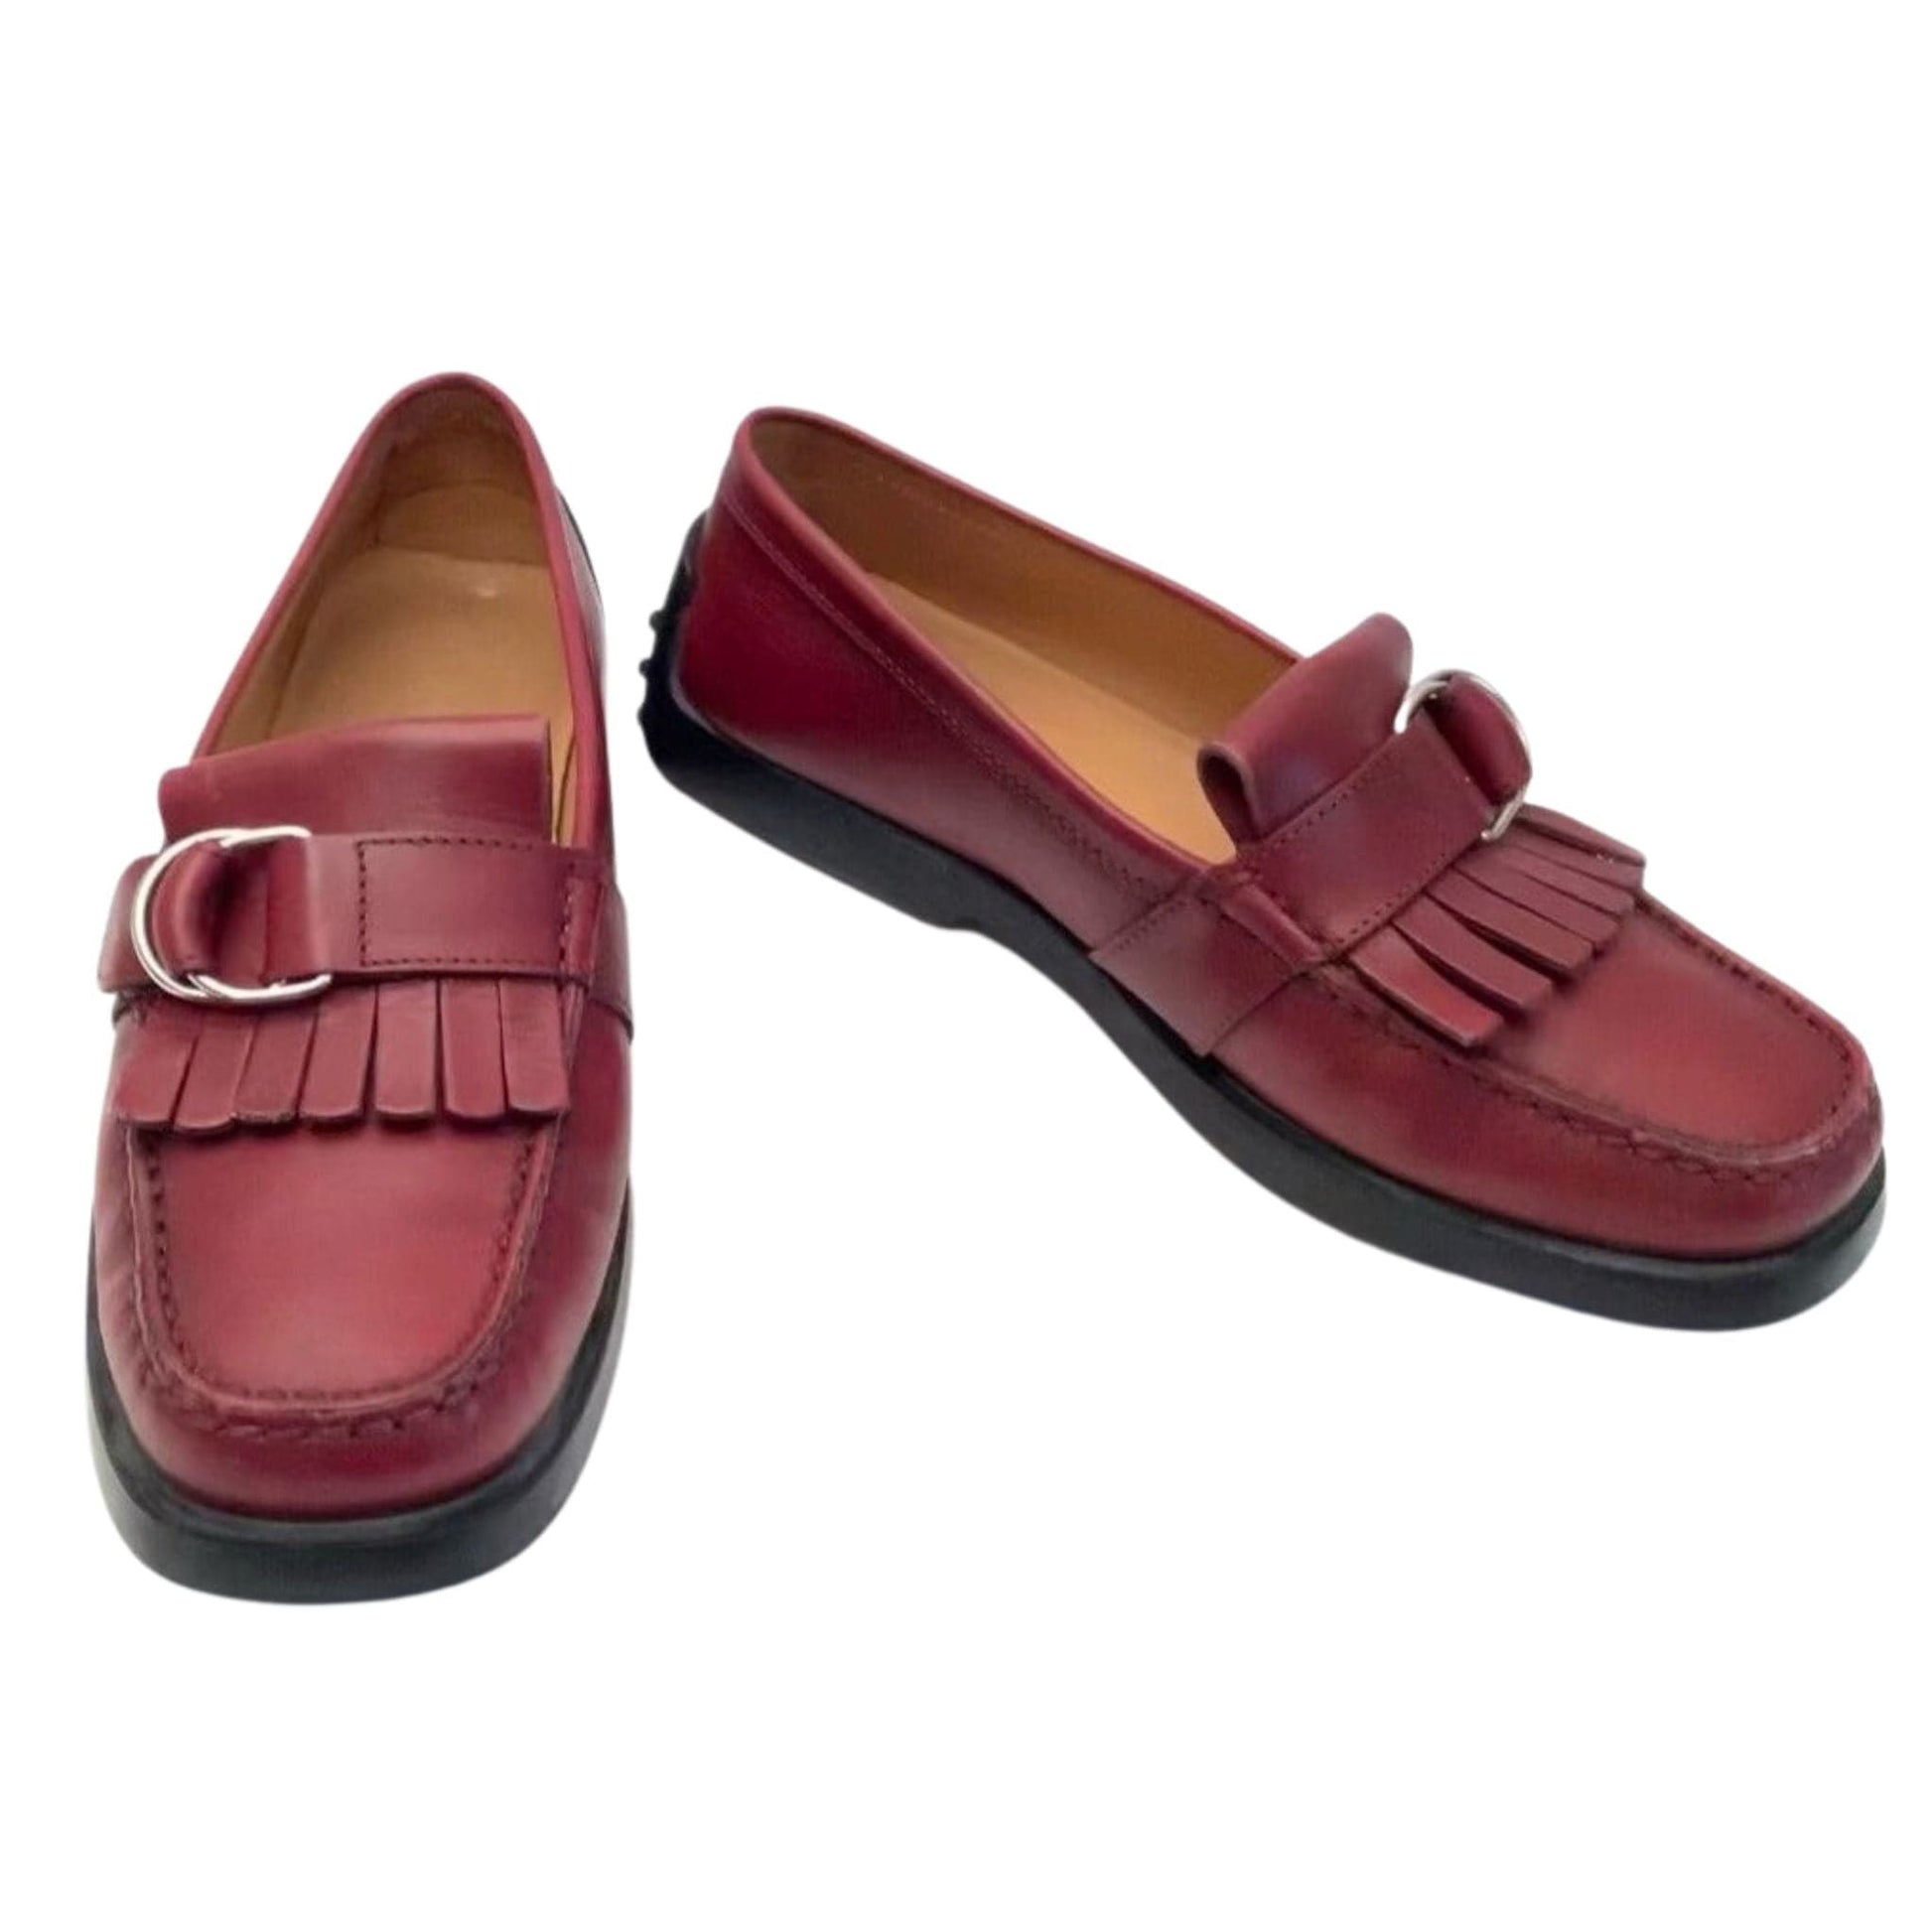 Kiltie Loafer Red Leather 8 / Red / Y2K - Now